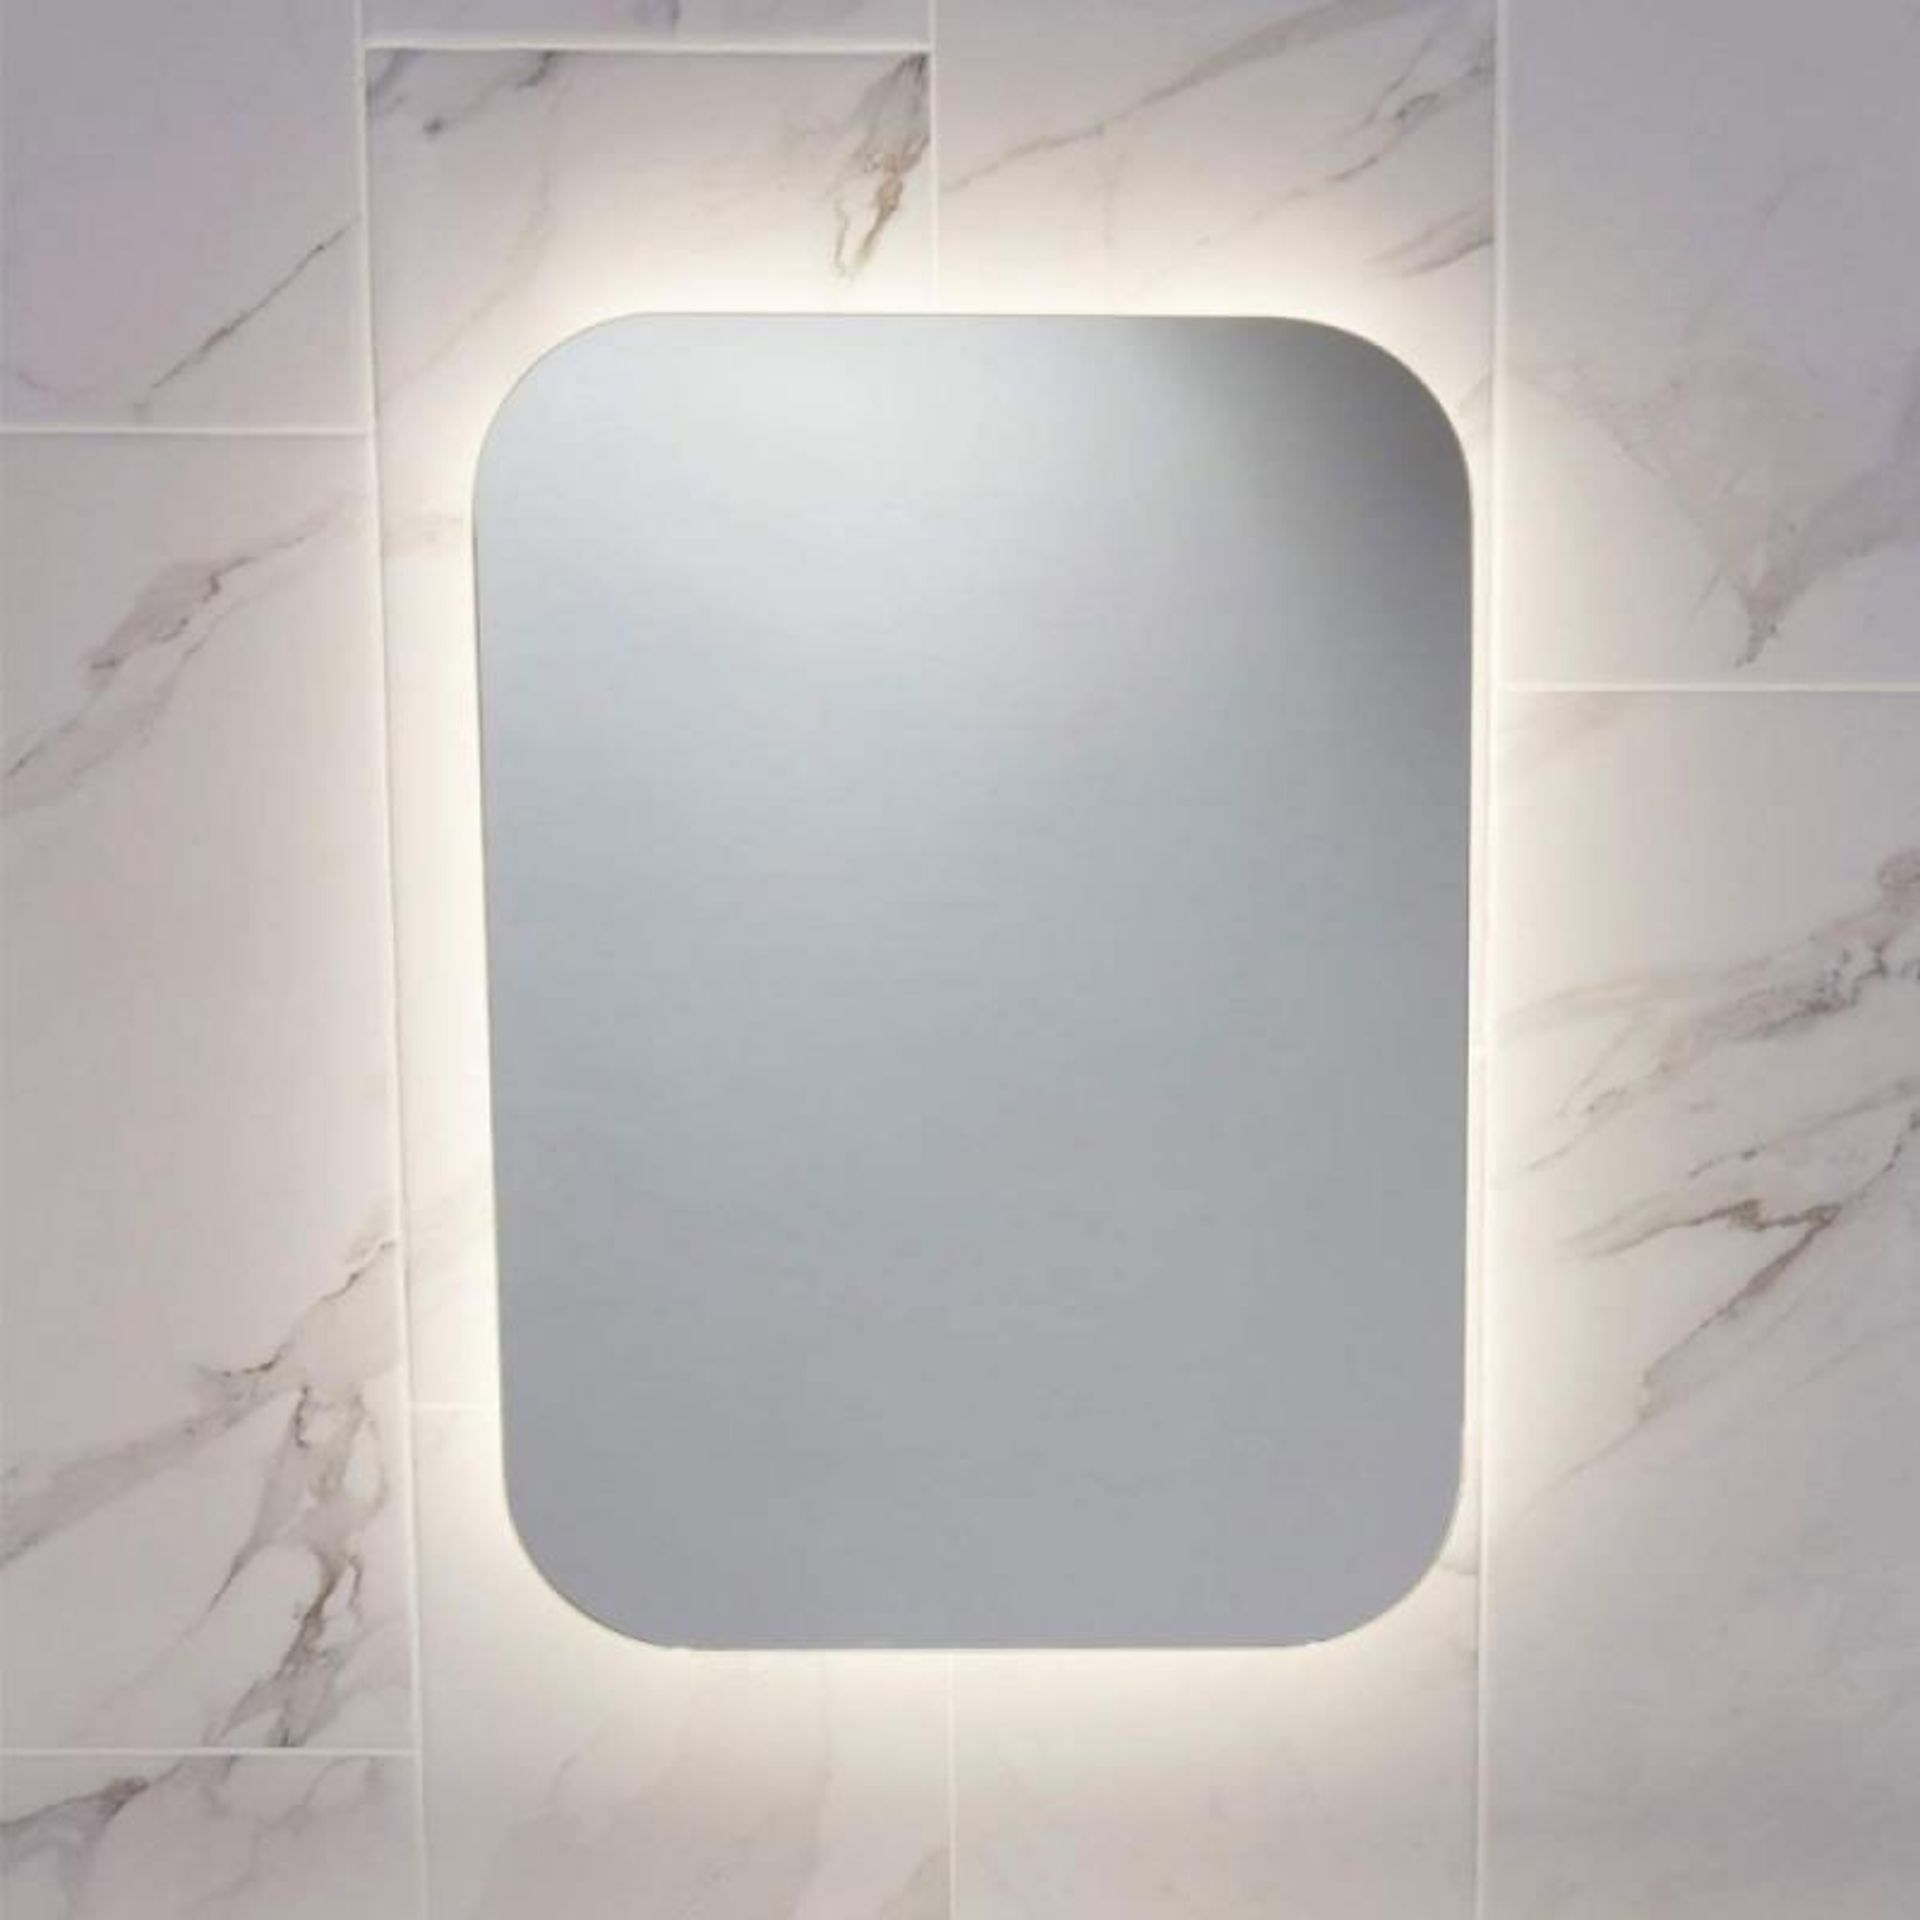 1 xScudo Aura 500 x 700mm LED Mirror with Demister Pad - New & Boxed Stock - Ref: AURAMIRROR - CL40